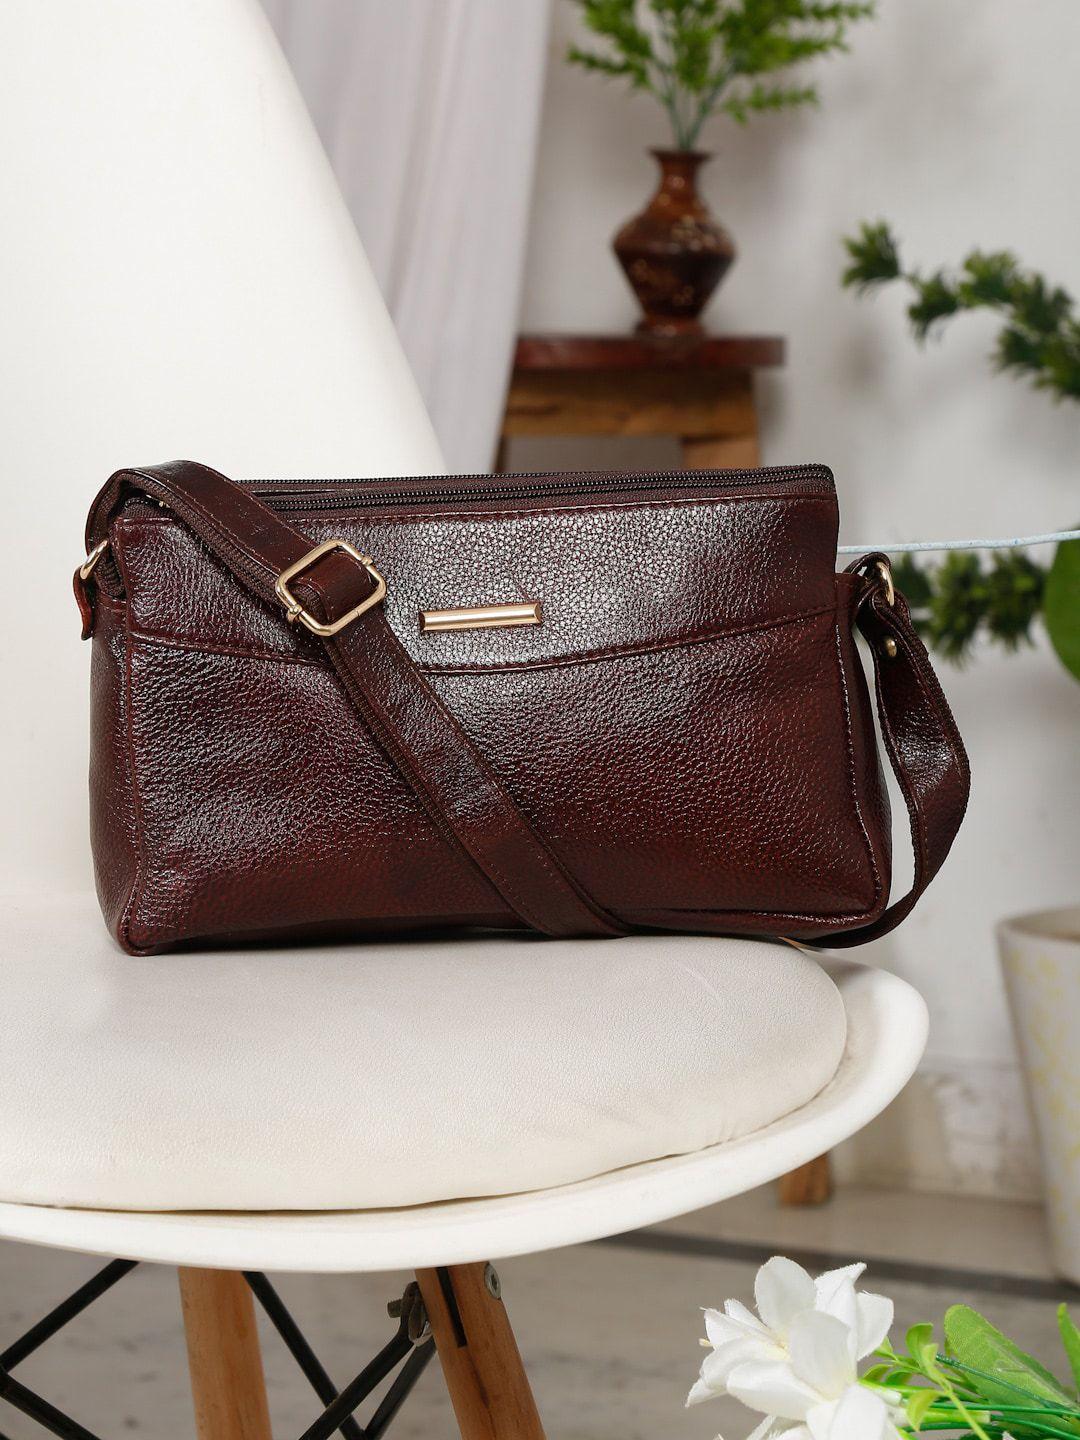 teakwood leathers textured leather structured sling bag